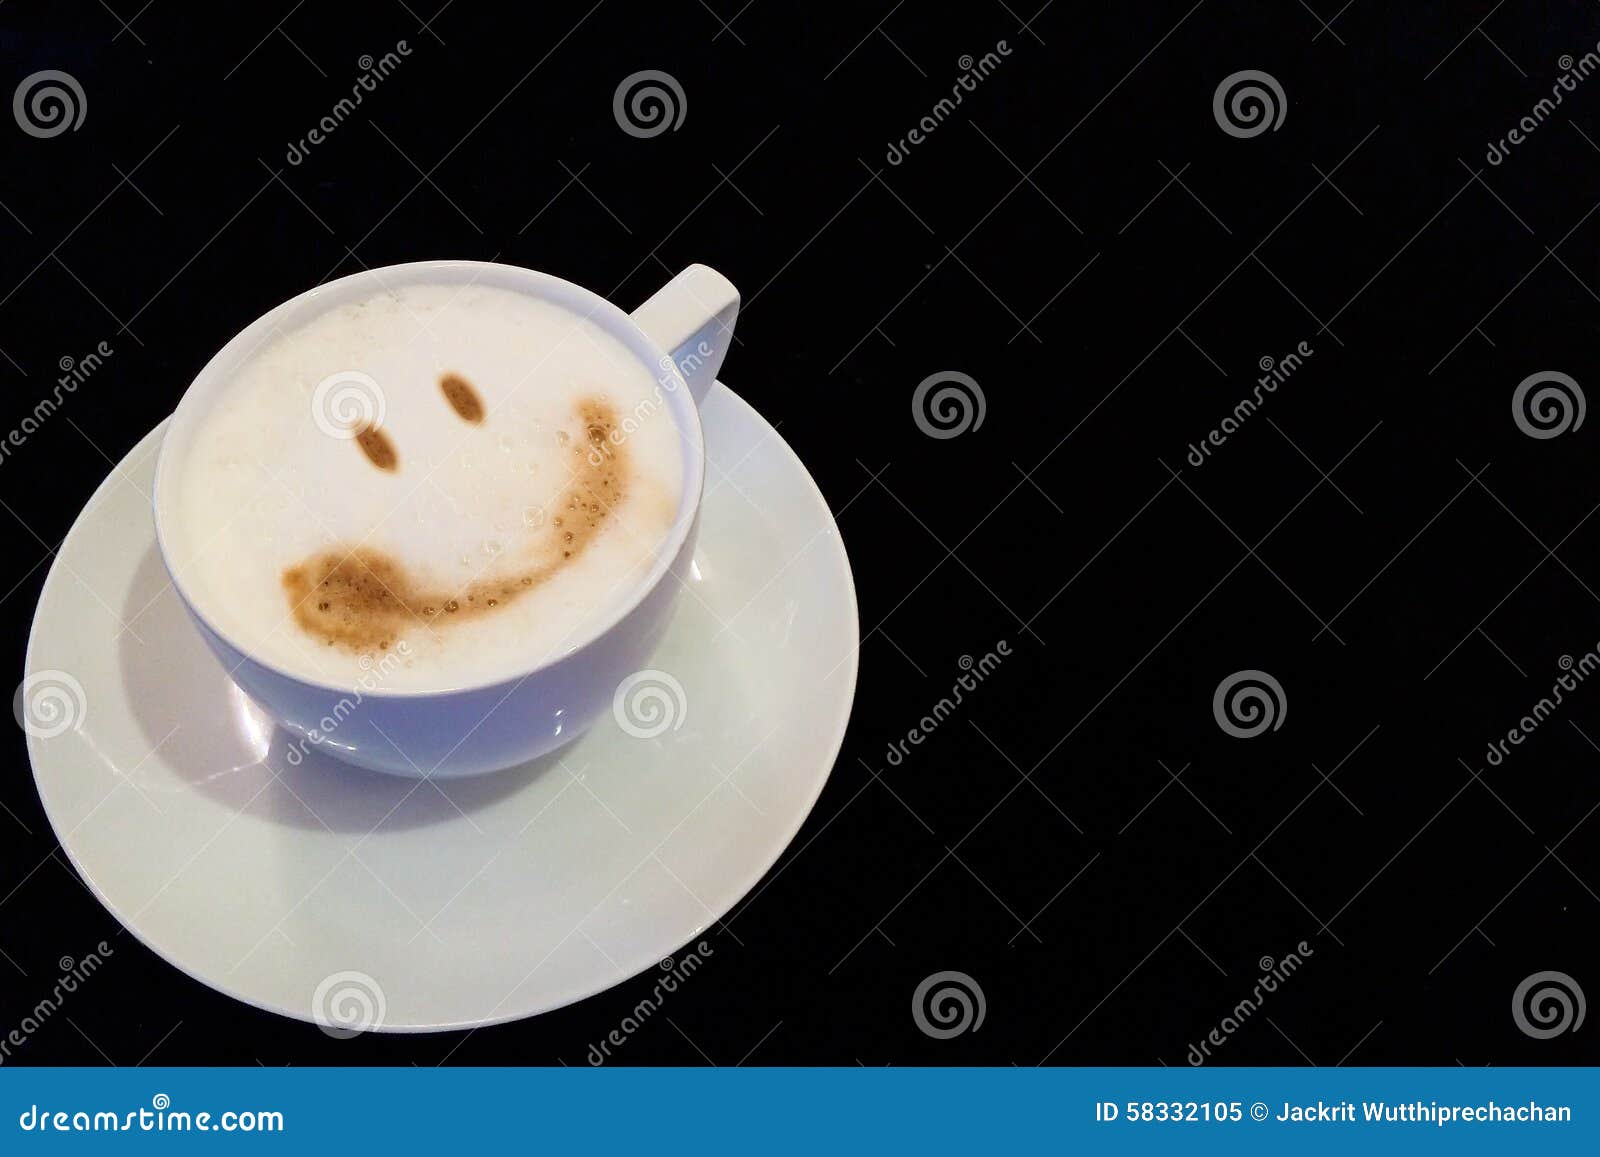 7,000+ Big Cup Of Coffee Stock Photos, Pictures & Royalty-Free